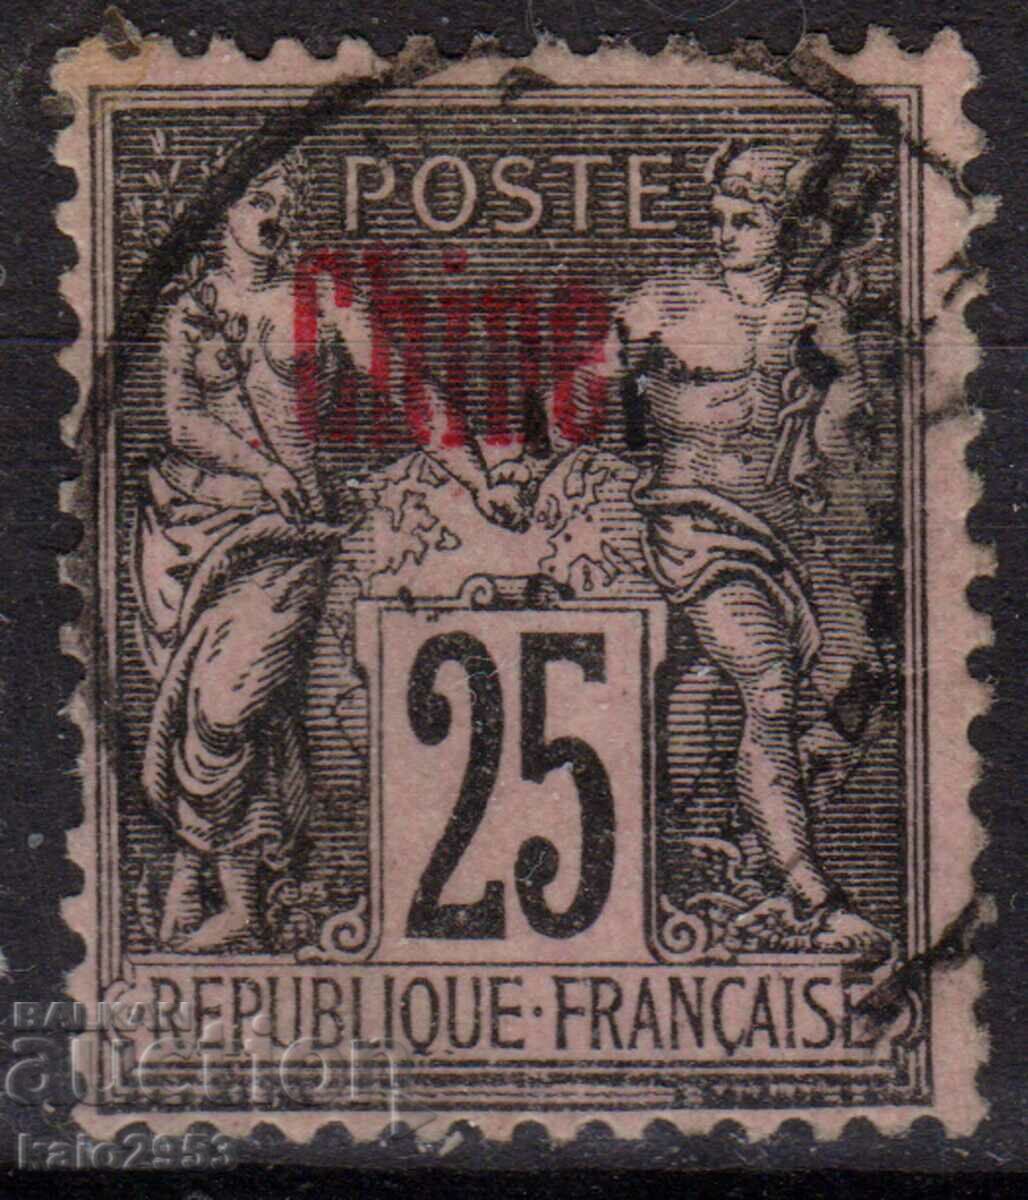 France/Post in China-1892- Allegory with superscript CHINE+nom., stamp